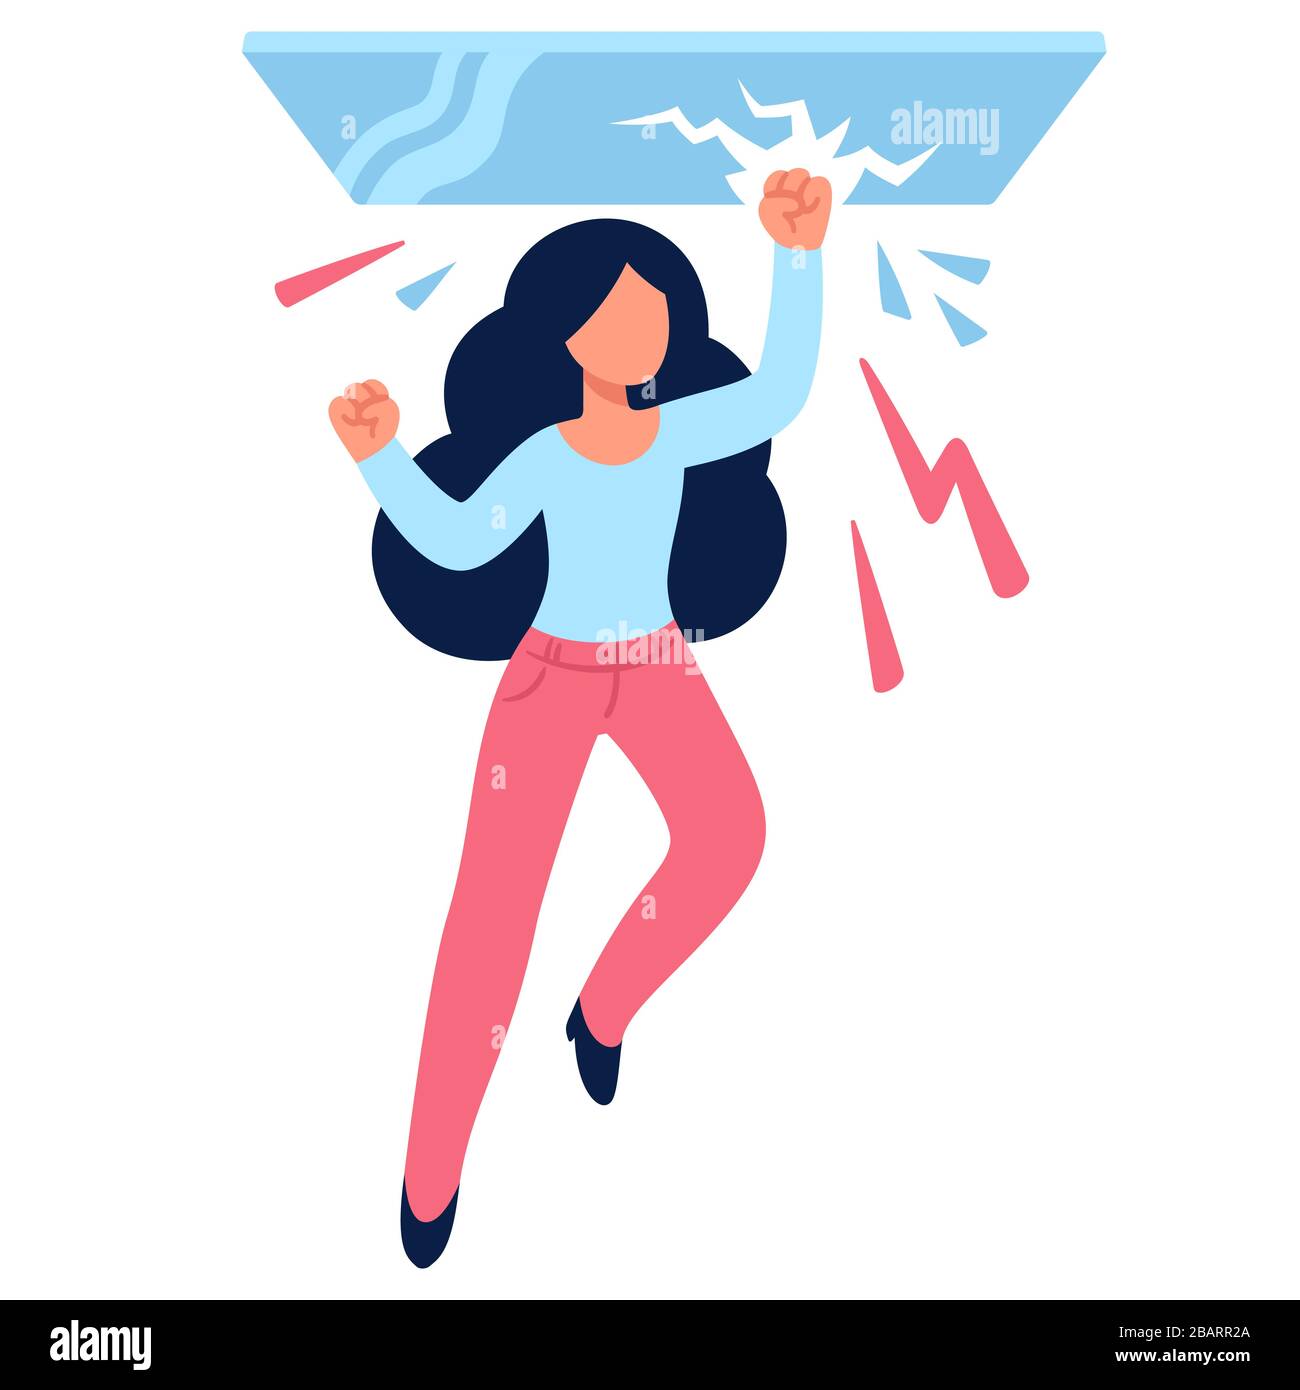 Cartoon woman drawing breaking glass ceiling. Sexism issues in work culture. Simple flat vector style illustration. Stock Vector